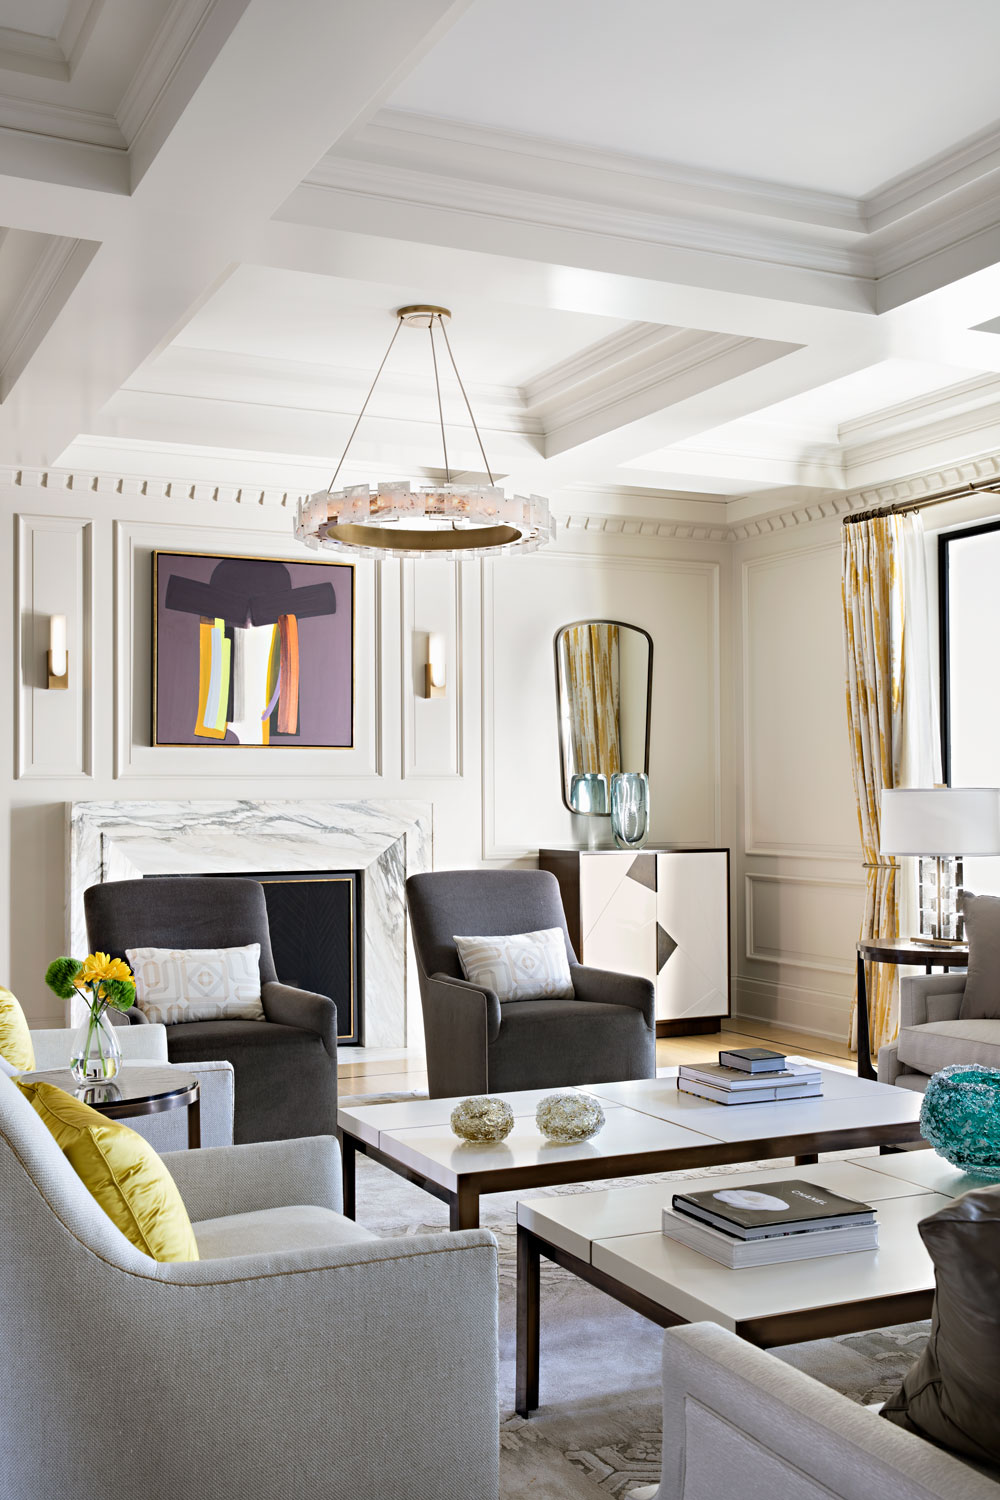 03-paneled-walls-coffered-ceiling-transitional-living-room-gary-drake-general-contractor.jpg